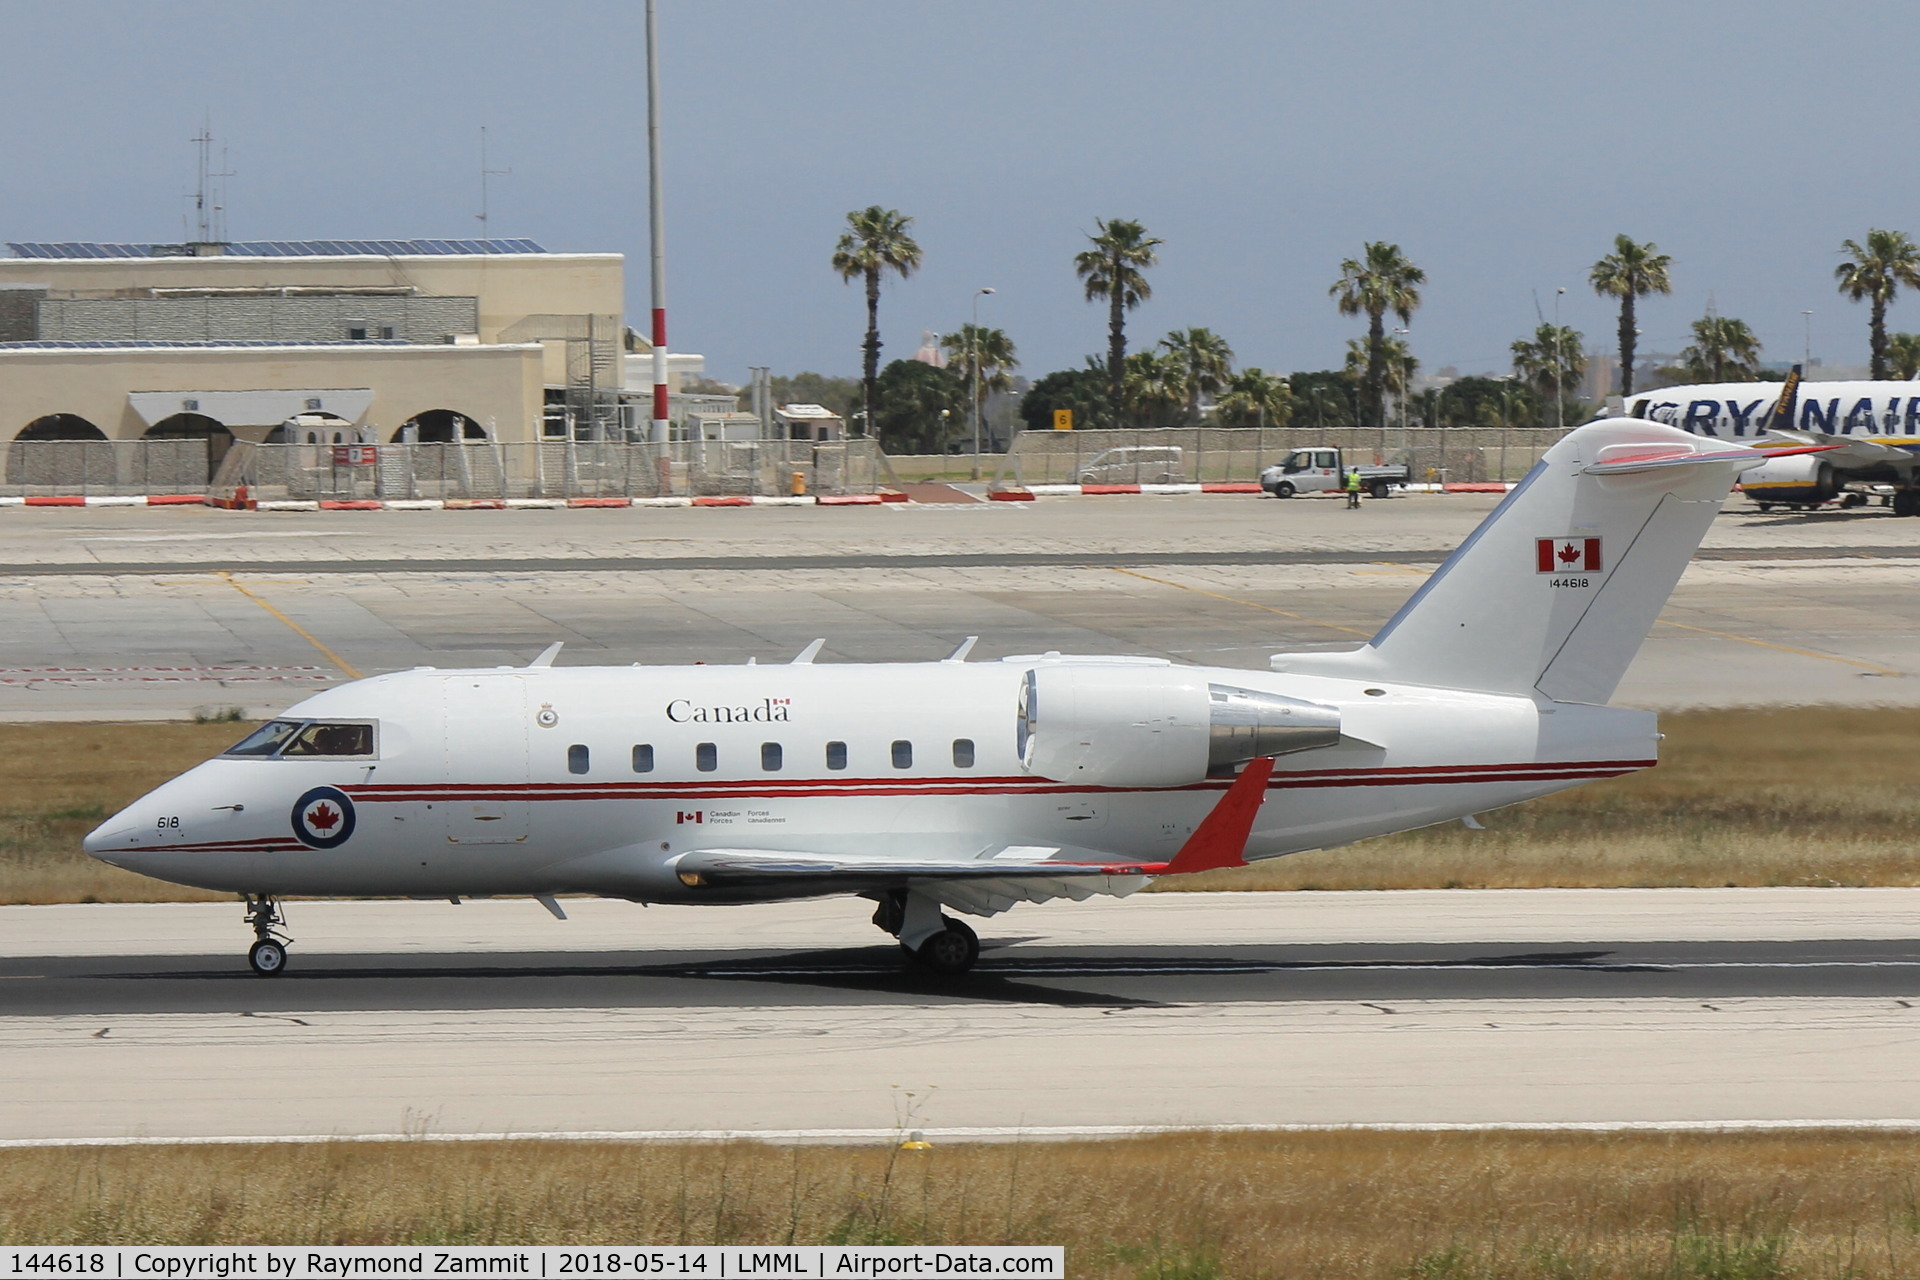 144618, 2002 Bombardier Challenger 604 (CL-600-2B16) C/N 5535, Bombardier Challenger604  144618 Canadian Armed Forces